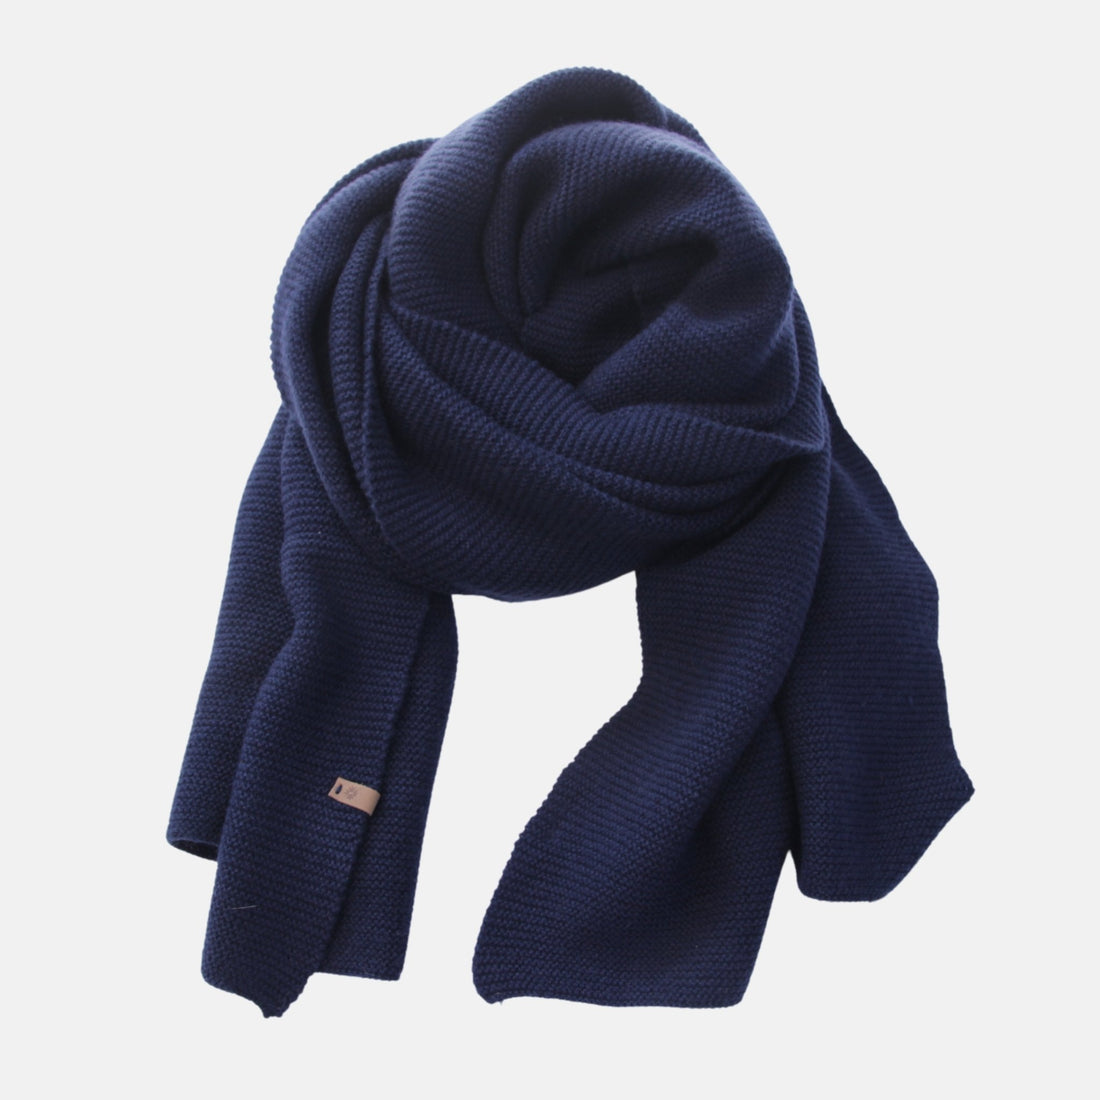 Scarves fair trade ethical sustainable fashion Oversized Sized Garter Stitched Merino Scarf in Blue conscious purchase Dinadi